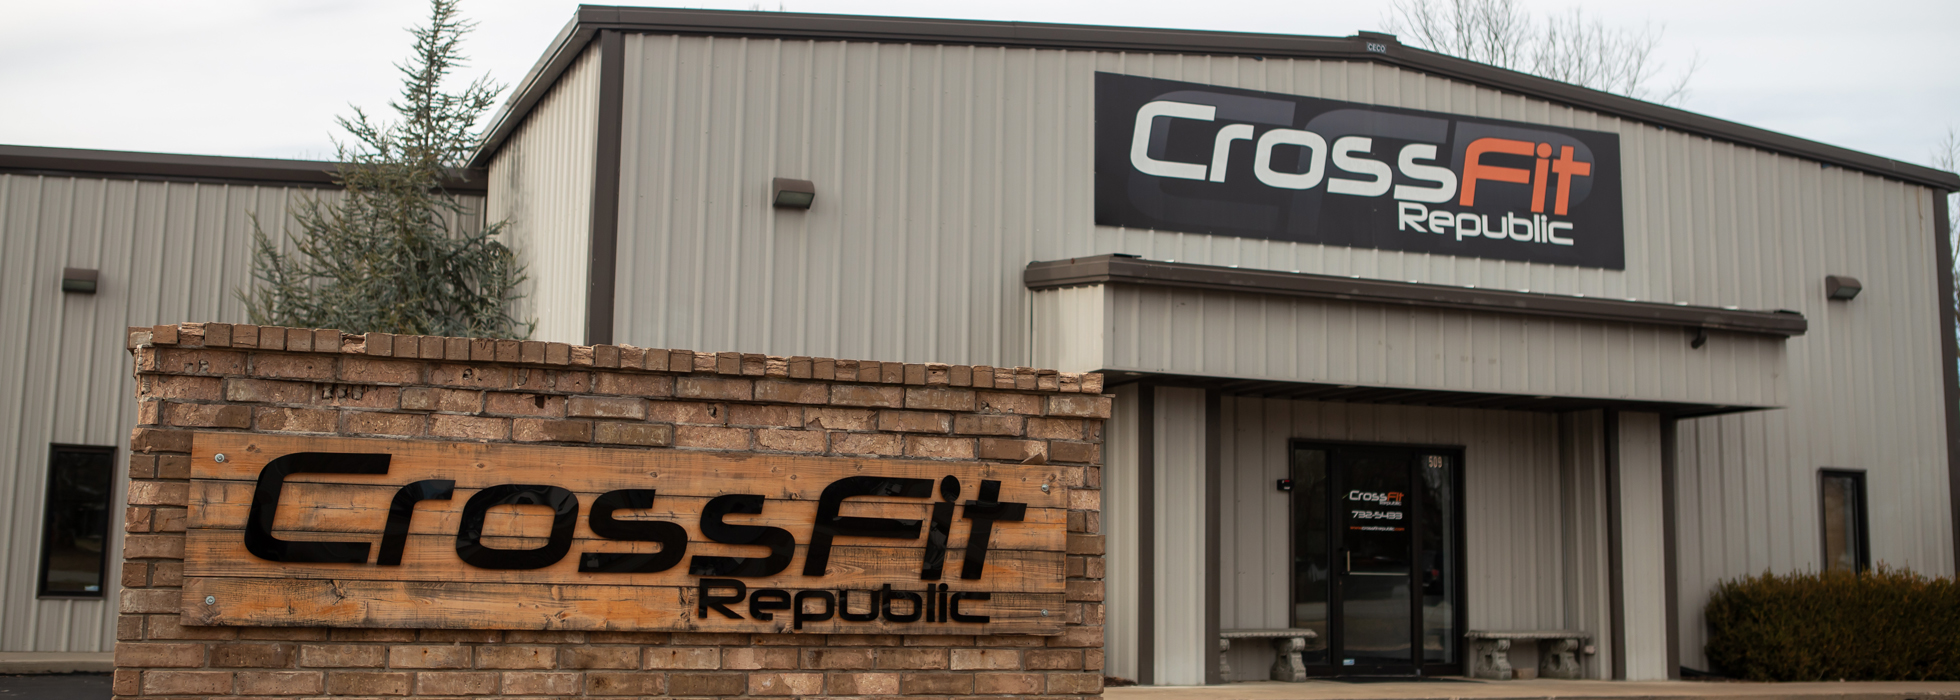 Why CrossFit Republic Is Ranked One of the Best Gyms In Republic, MO